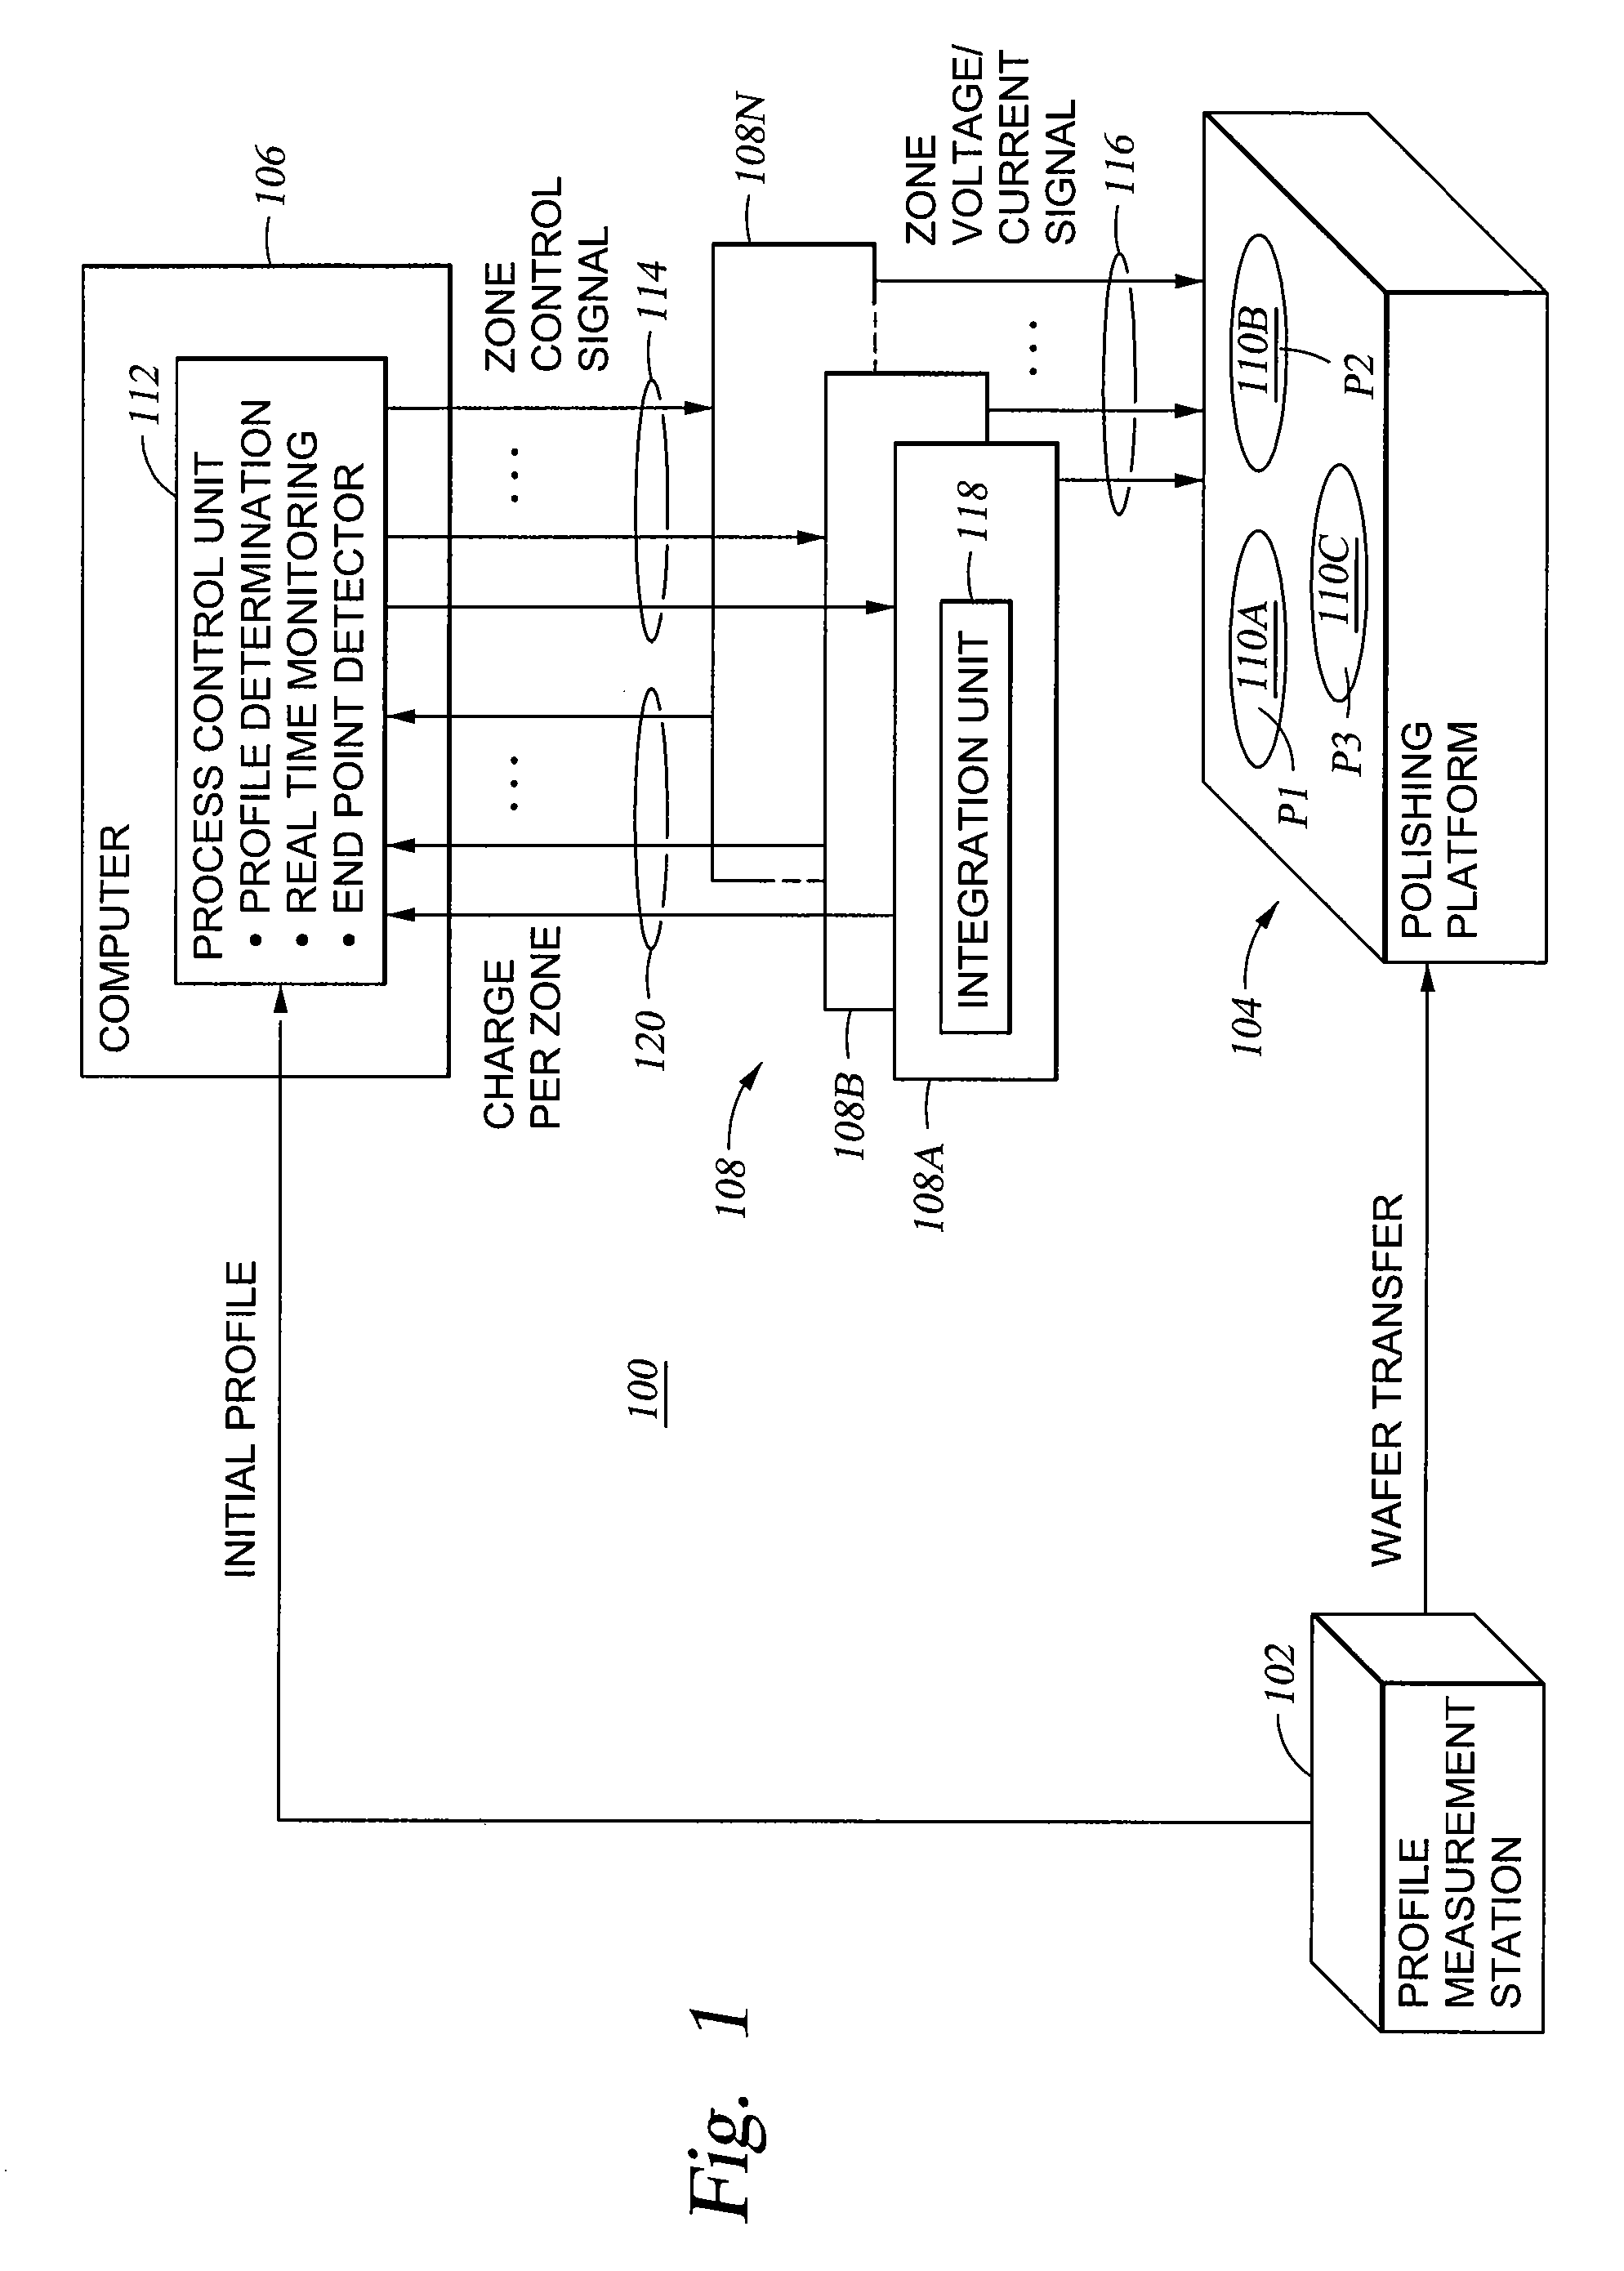 Endpoint for electroprocessing